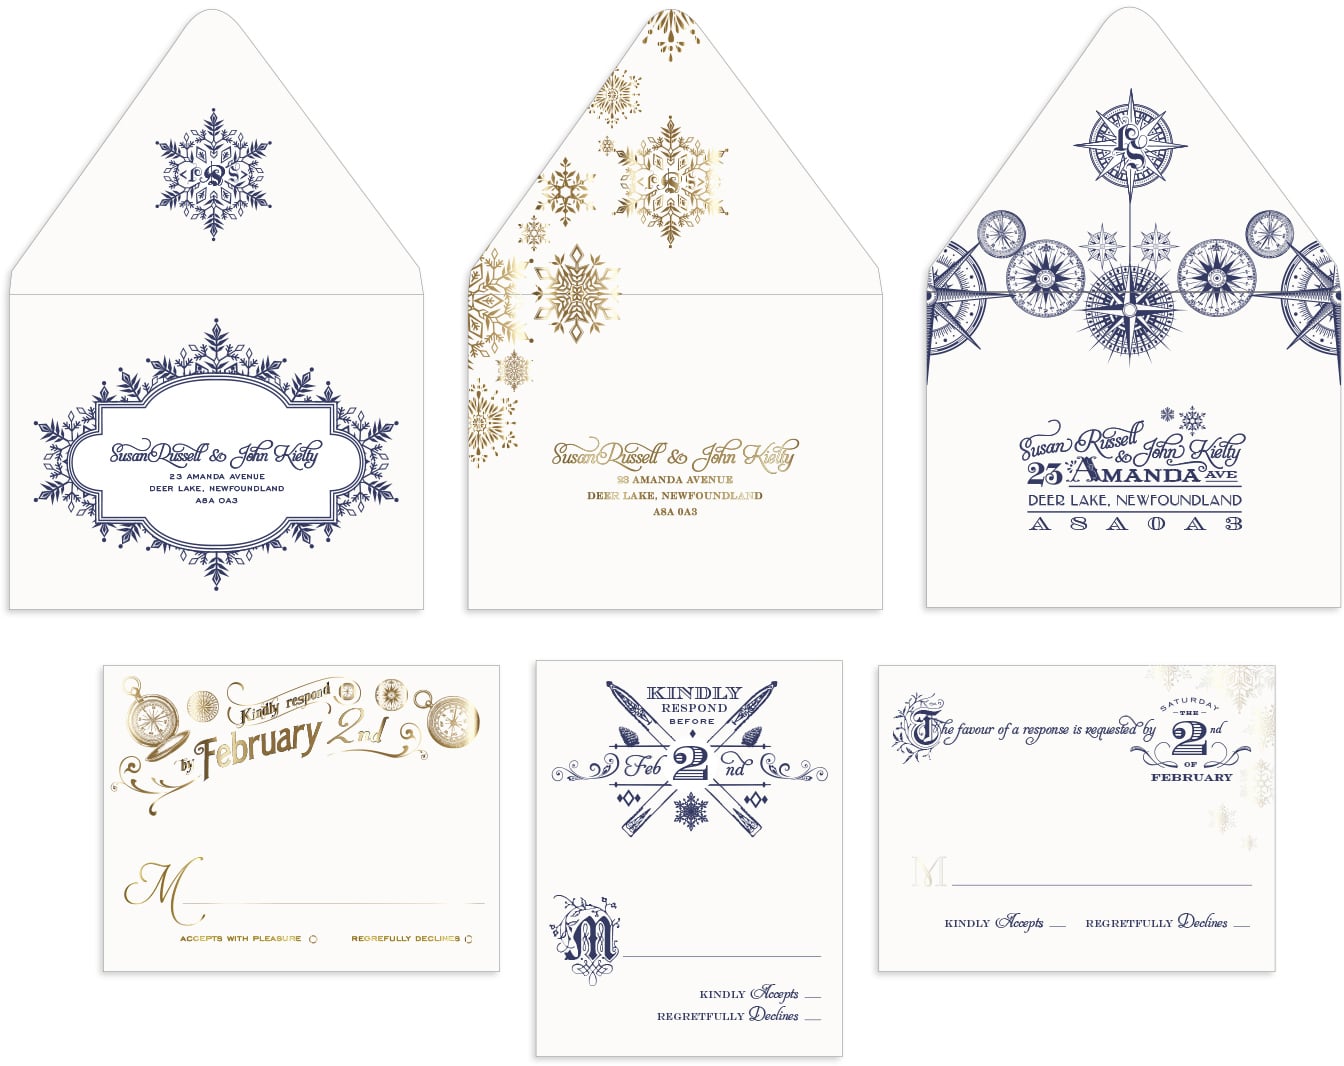 Snowflake and compass reply cards and envelopes